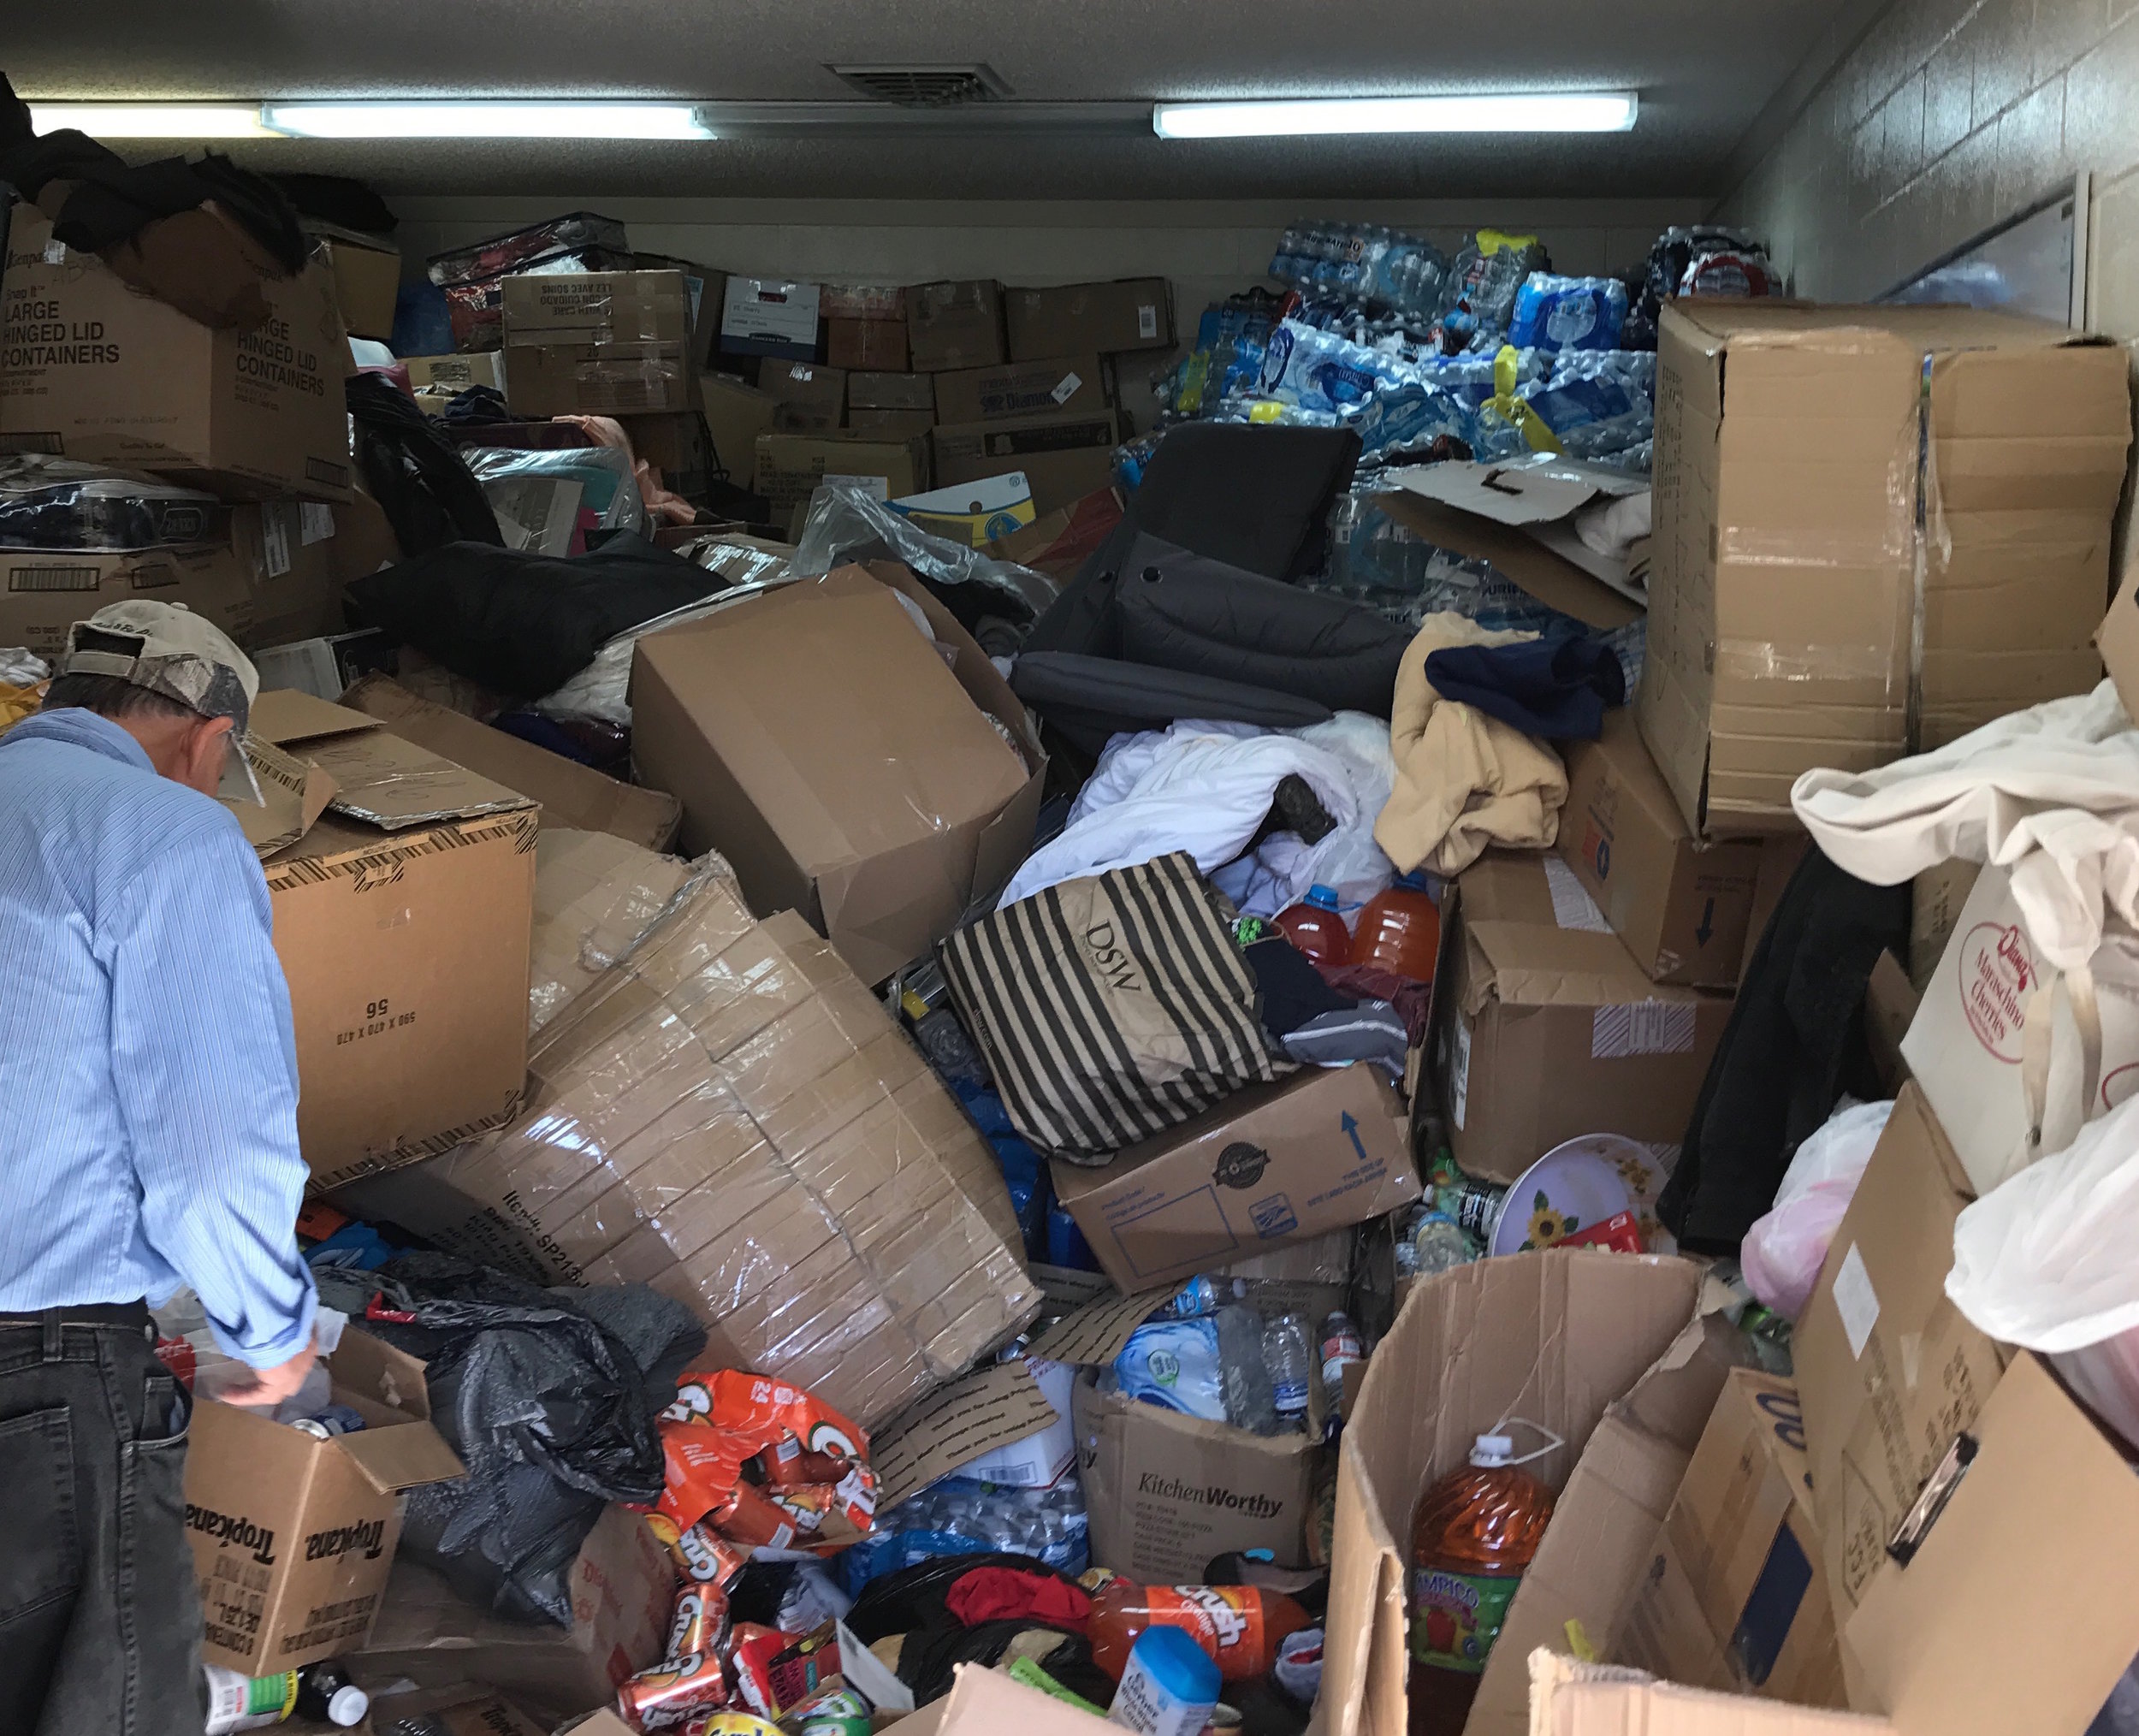  Donated clothing, food, water, and supplies to be sorted and organized for daily trips across to Nuevo Laredo to support the Cuban migrant community in limbo. The Holding Institute serves as the Laredo staging site for this ministry of hospitality a